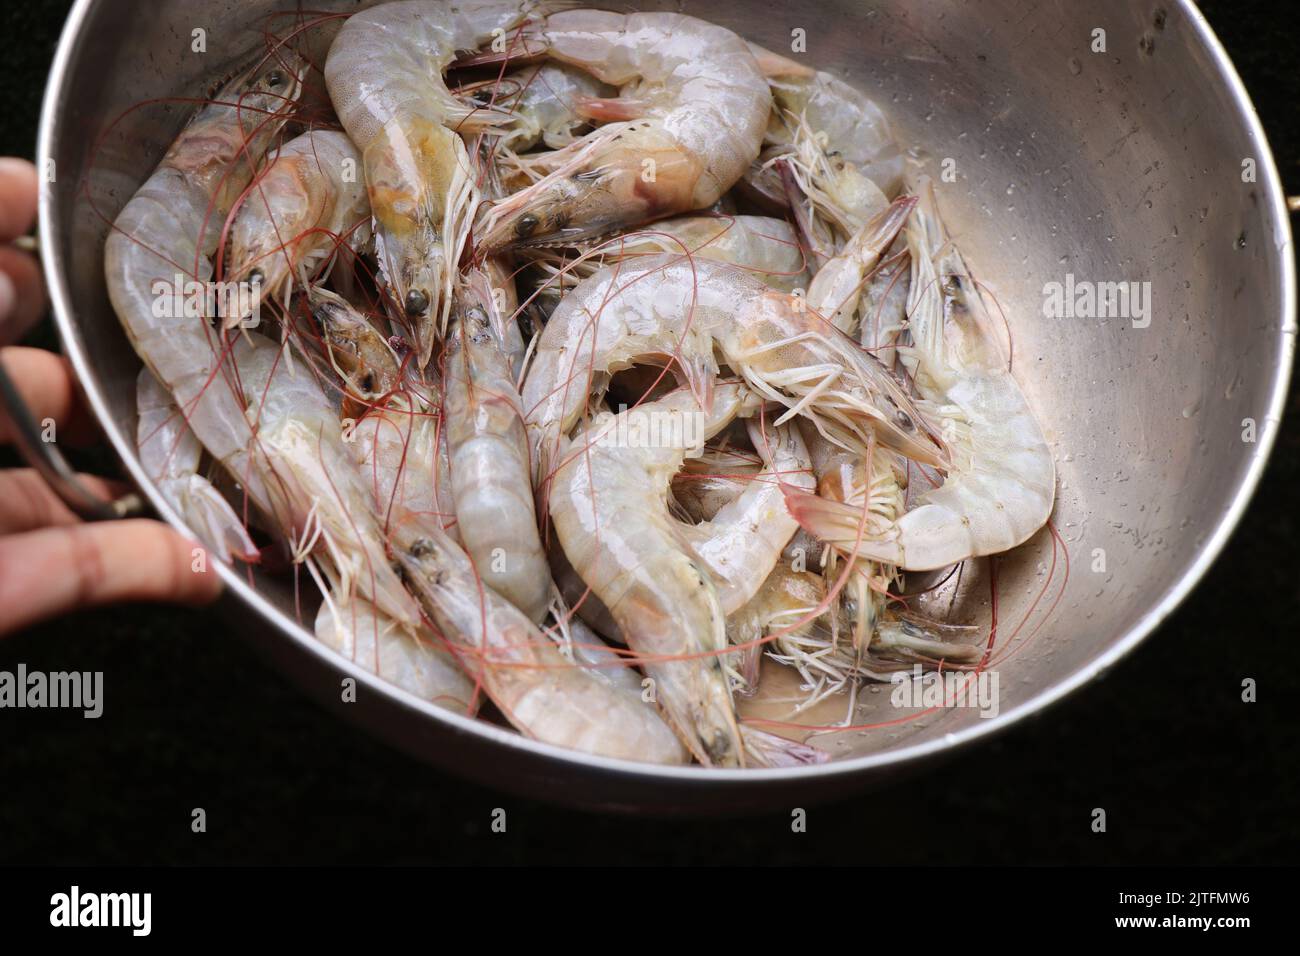 Fresh whole prawns in a small utensil held in hand Stock Photo